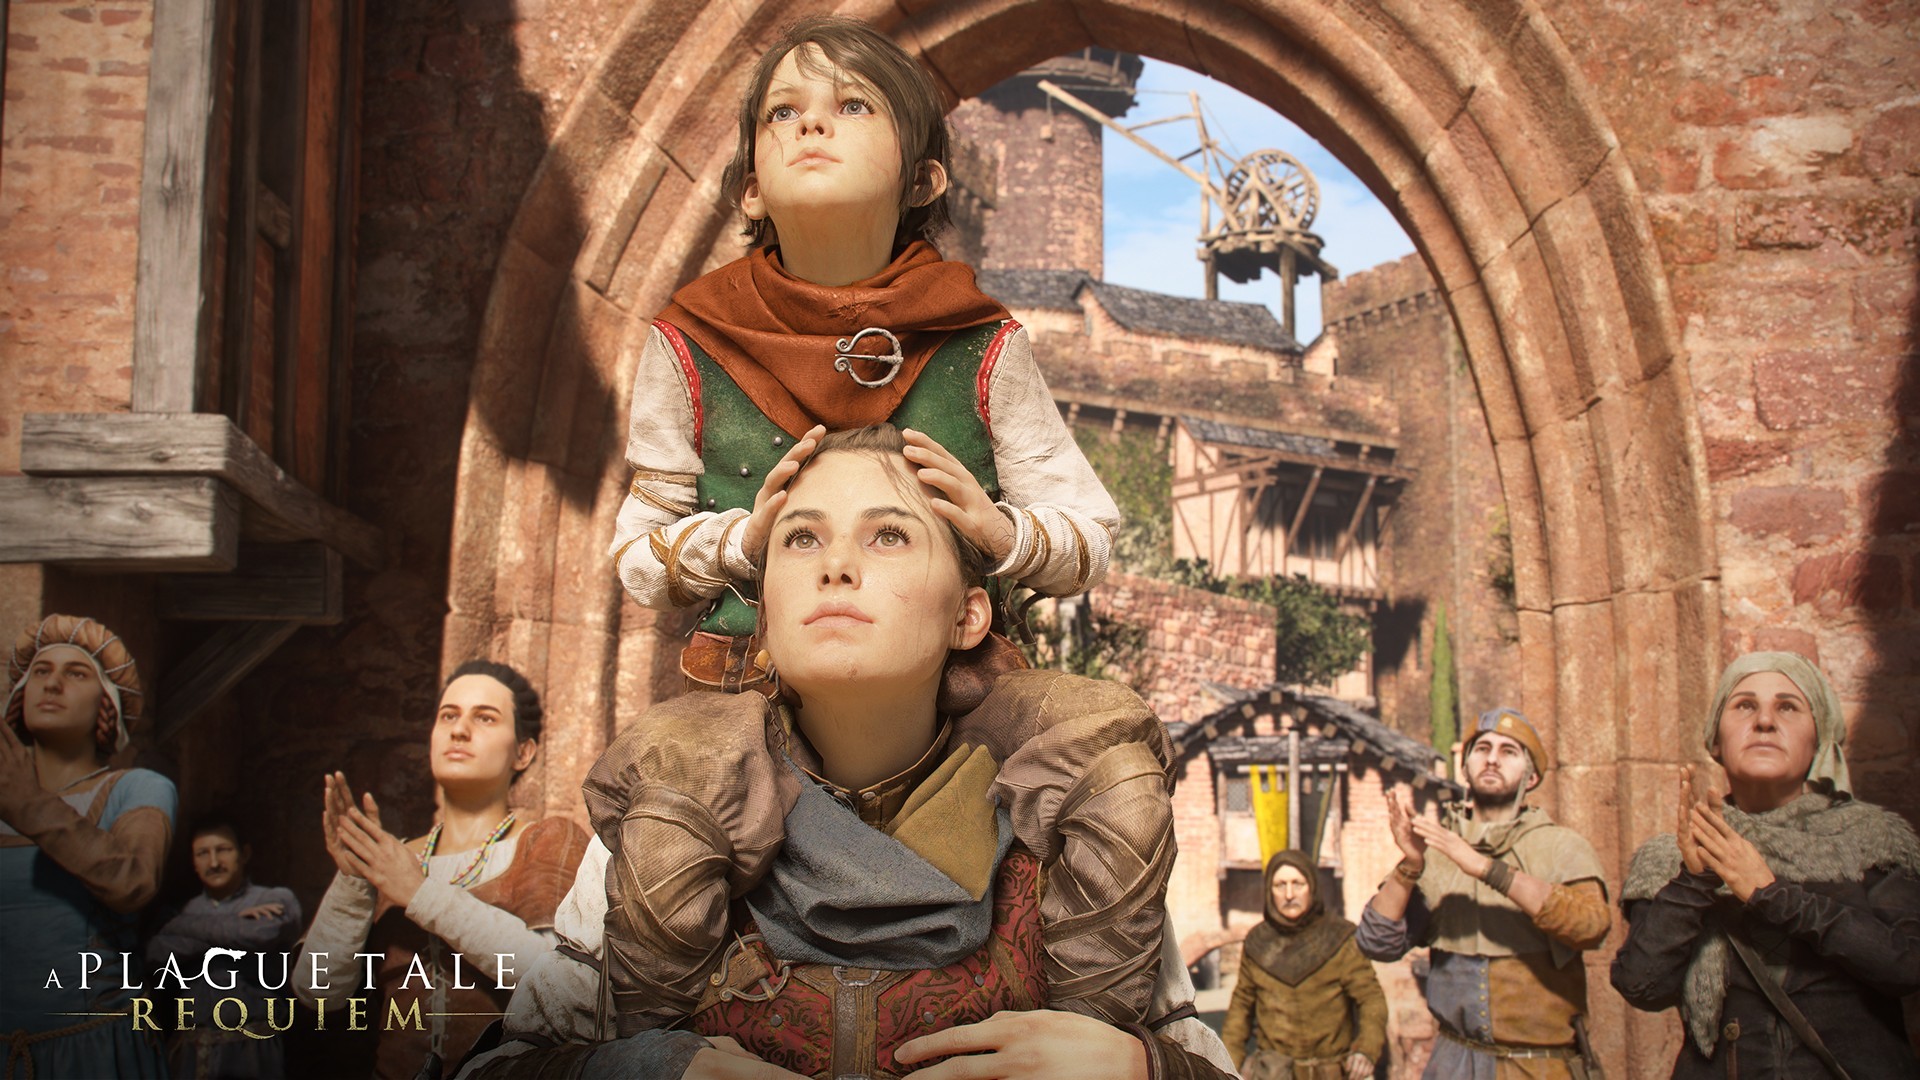 DataBlitz - EMBARK ON A HEARTRENDING JOURNEY! A Plague Tale Innocence for  PS4 will be available today at Datablitz! Follow the grim tale of young  Amicia and her little brother Hugo, in